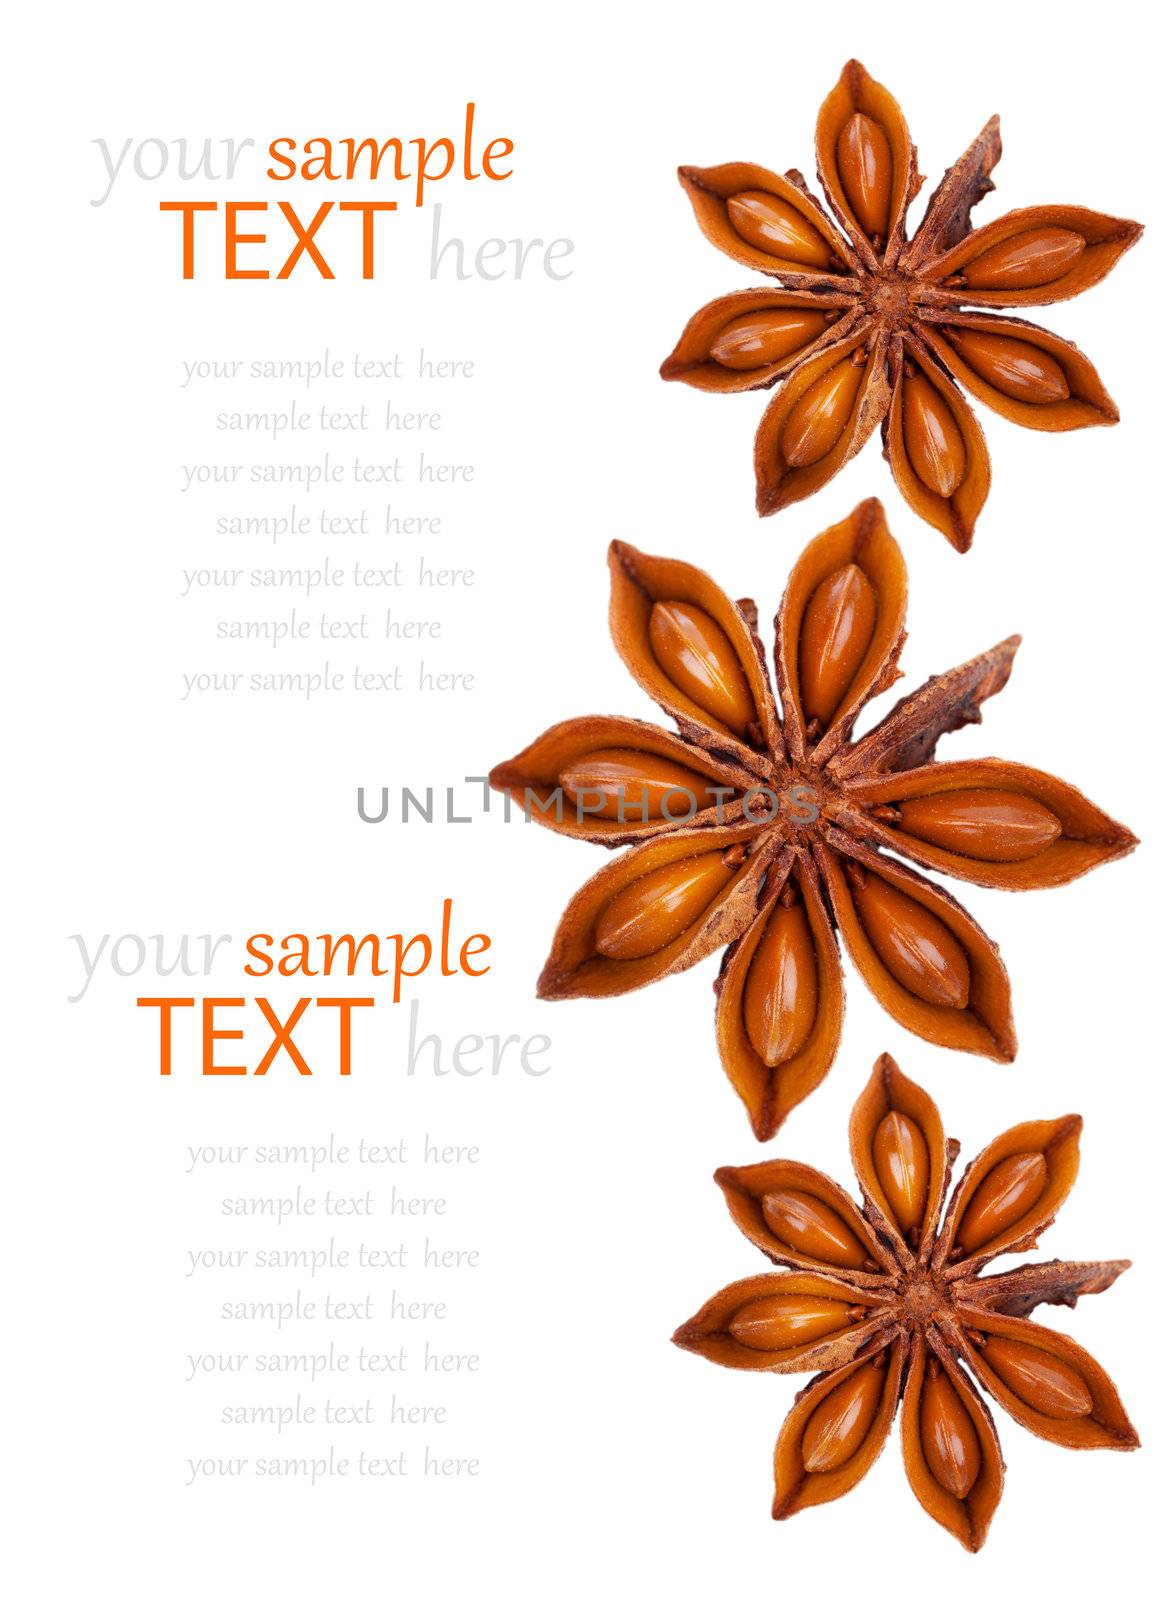 Whole Star Anise isolated on white background, with copy space by motorolka